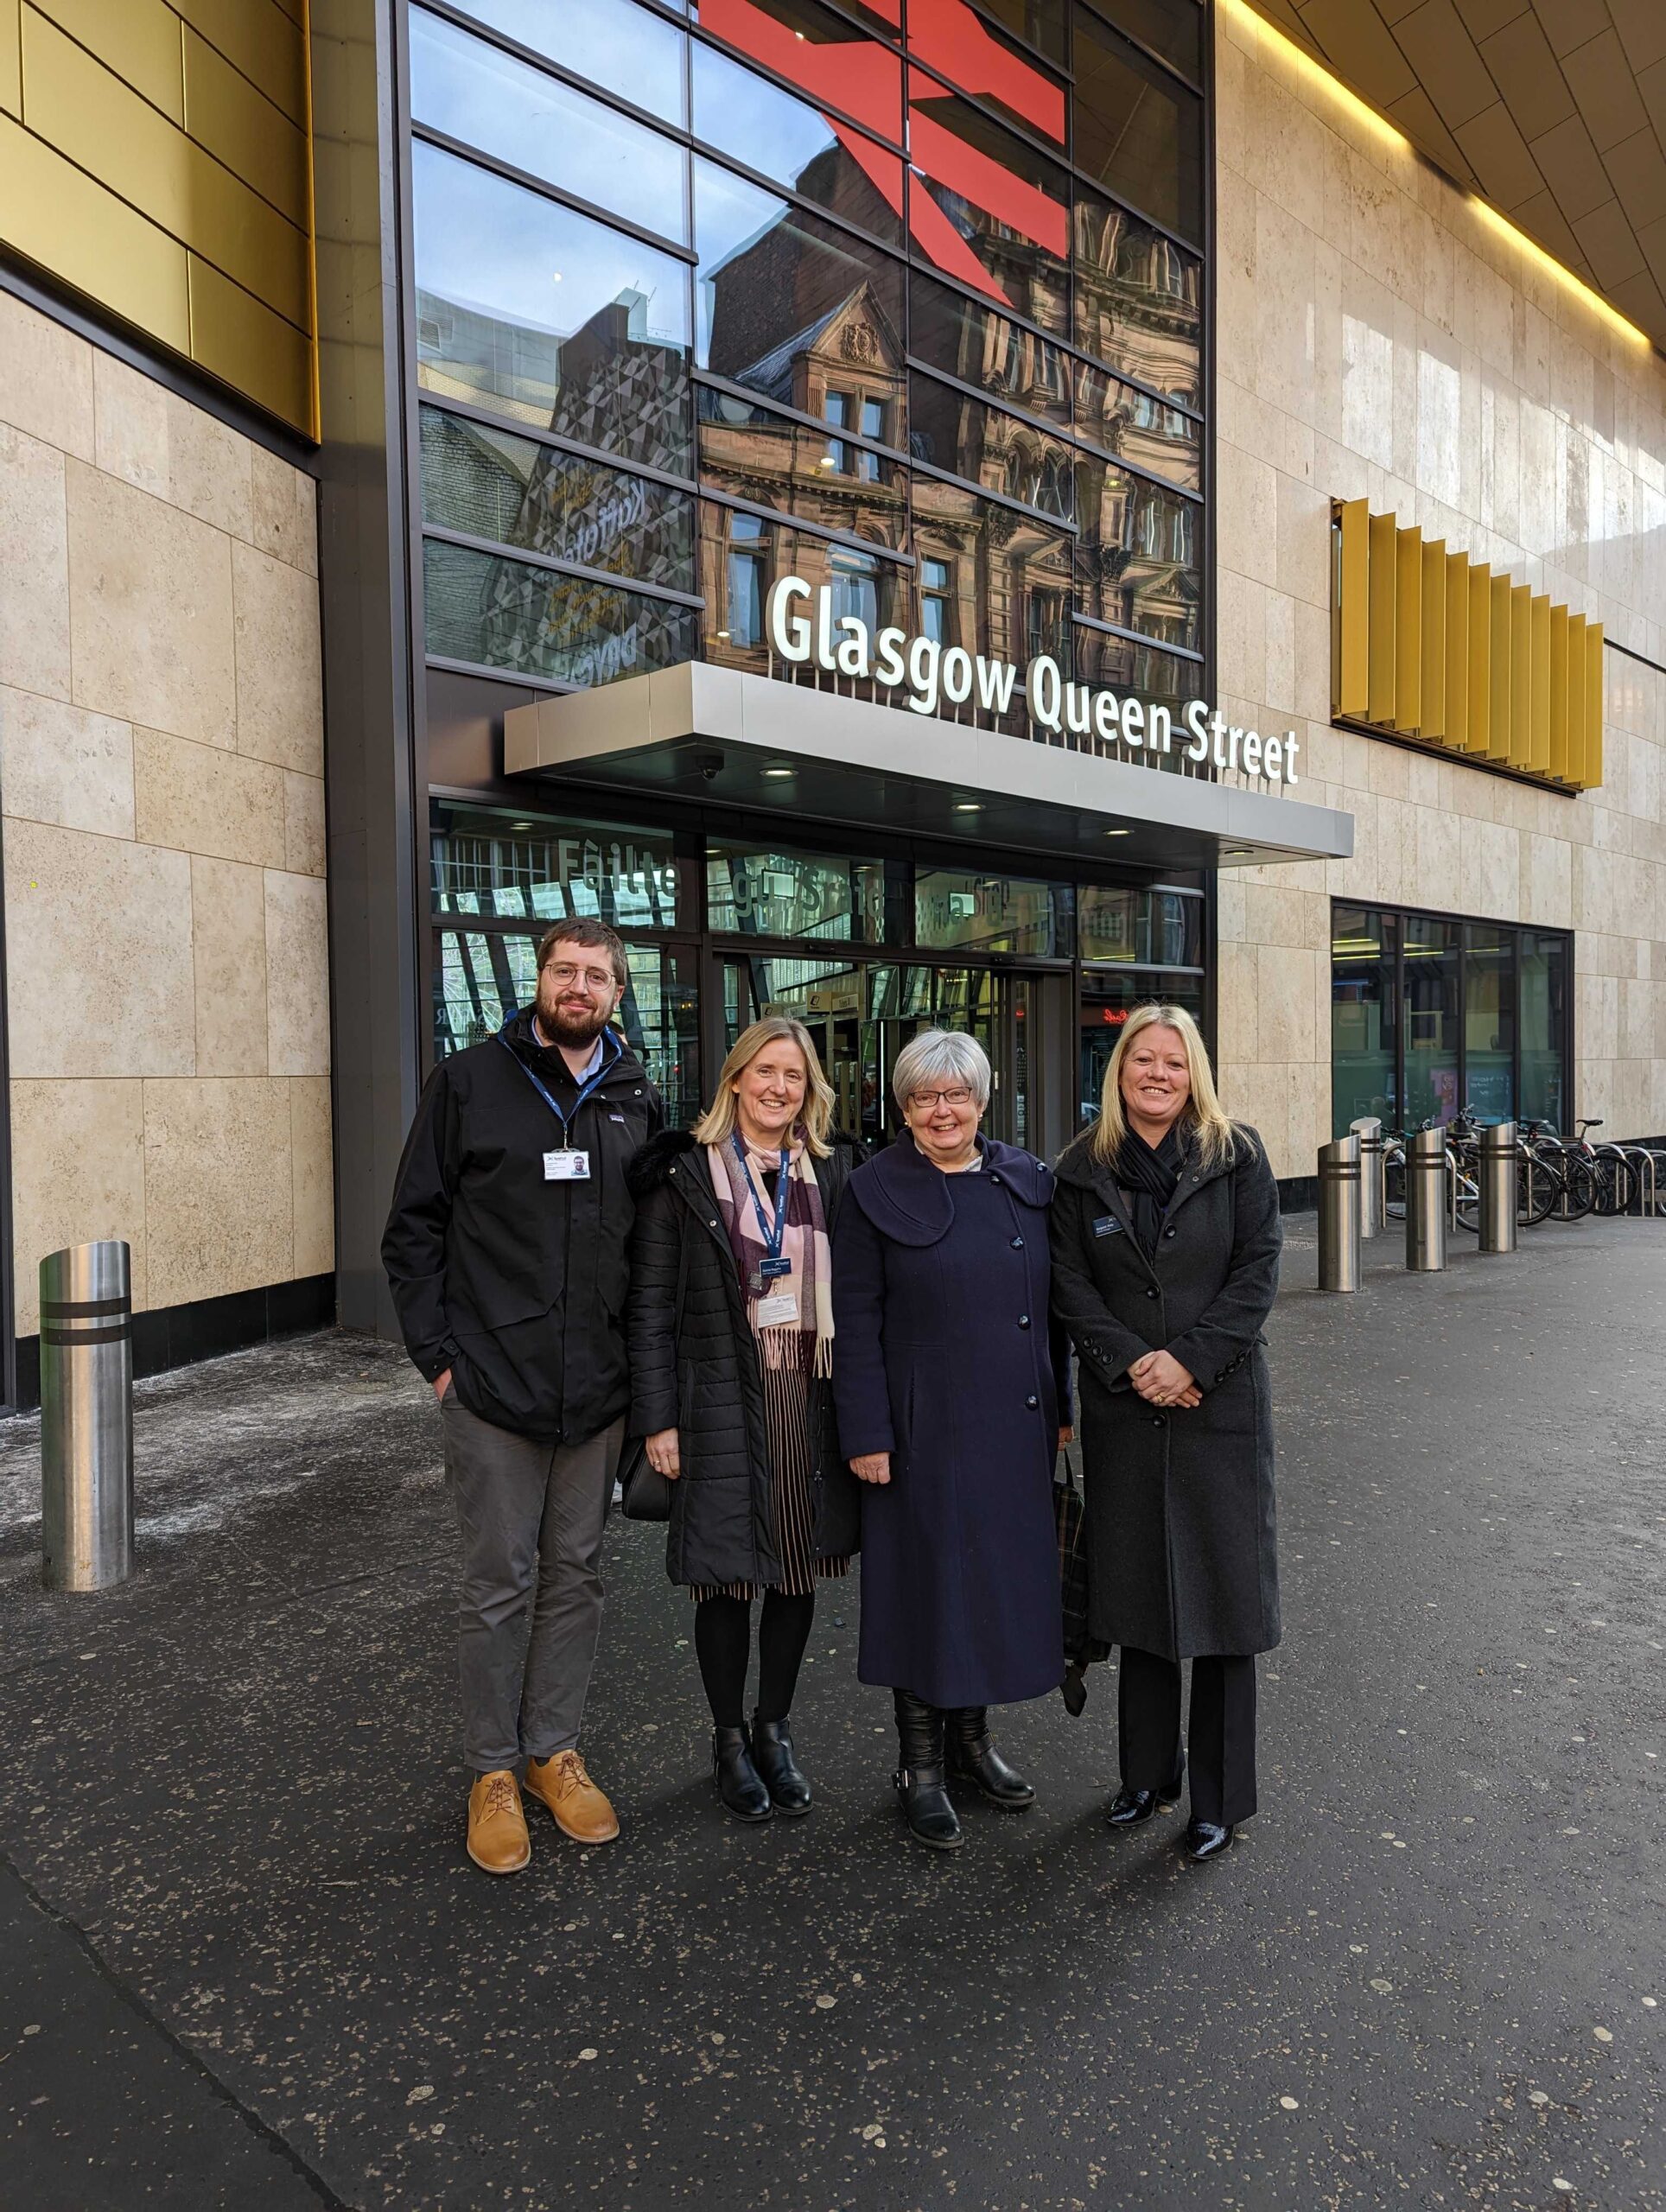 Marion Fellows MP with ScotRail CEO Joanne Maguire and other ScotRail staff, outside Glasgow Queen Street station.